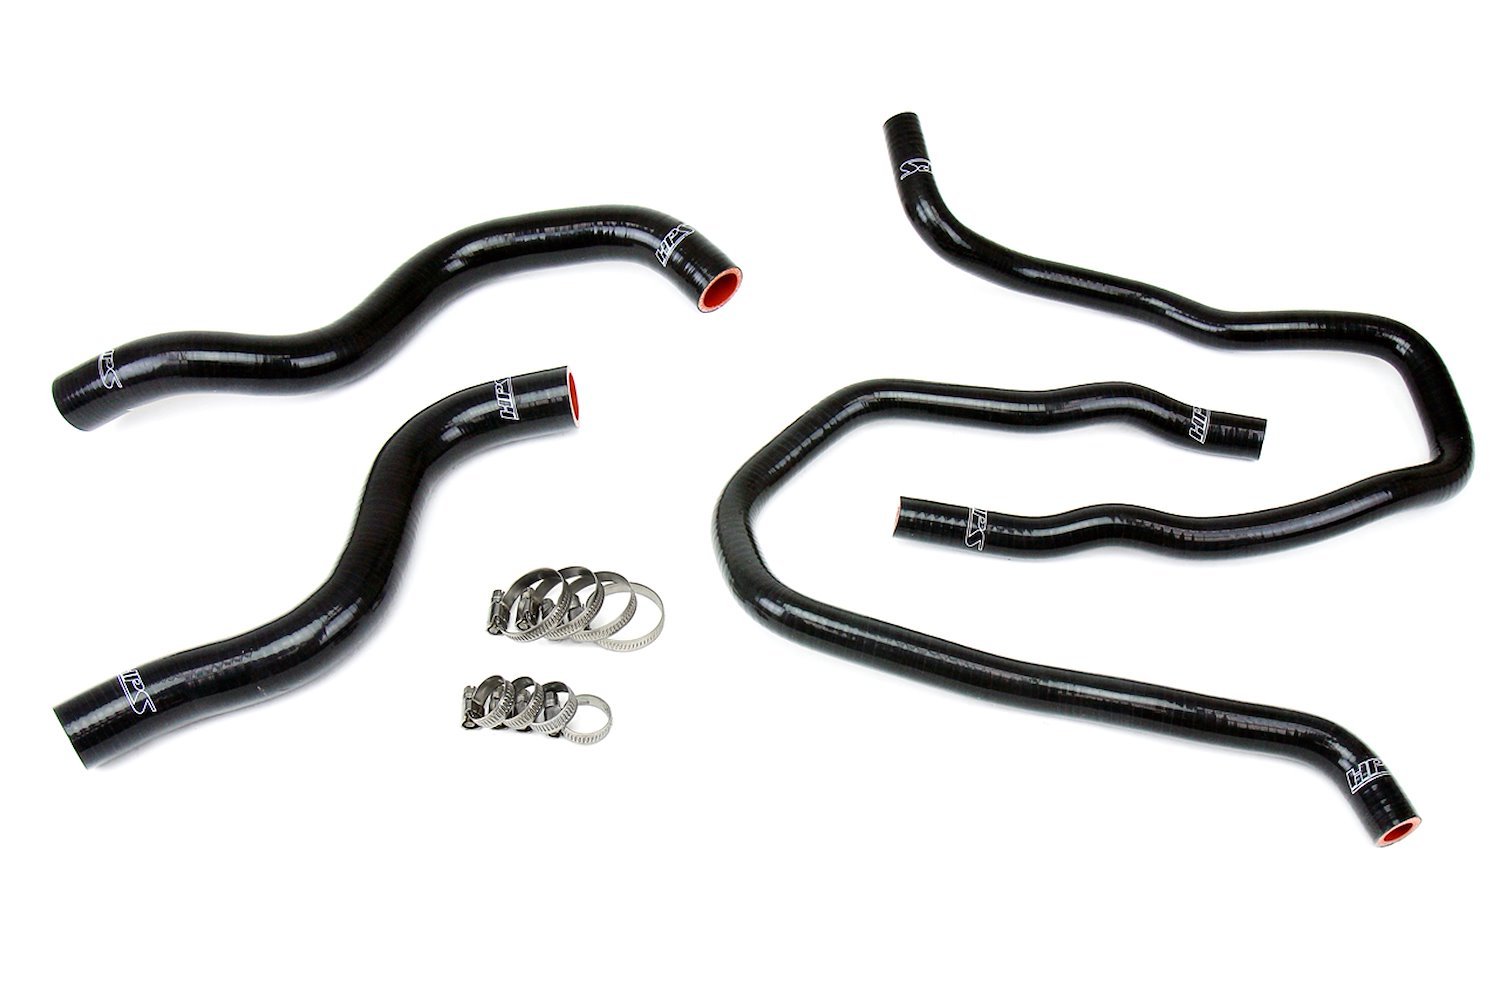 57-1387-BLK Coolant Hose Kit, High-Temp 3-Ply Reinforced Silicone, Replace Rubber Radiator Heater Coolant Hoses